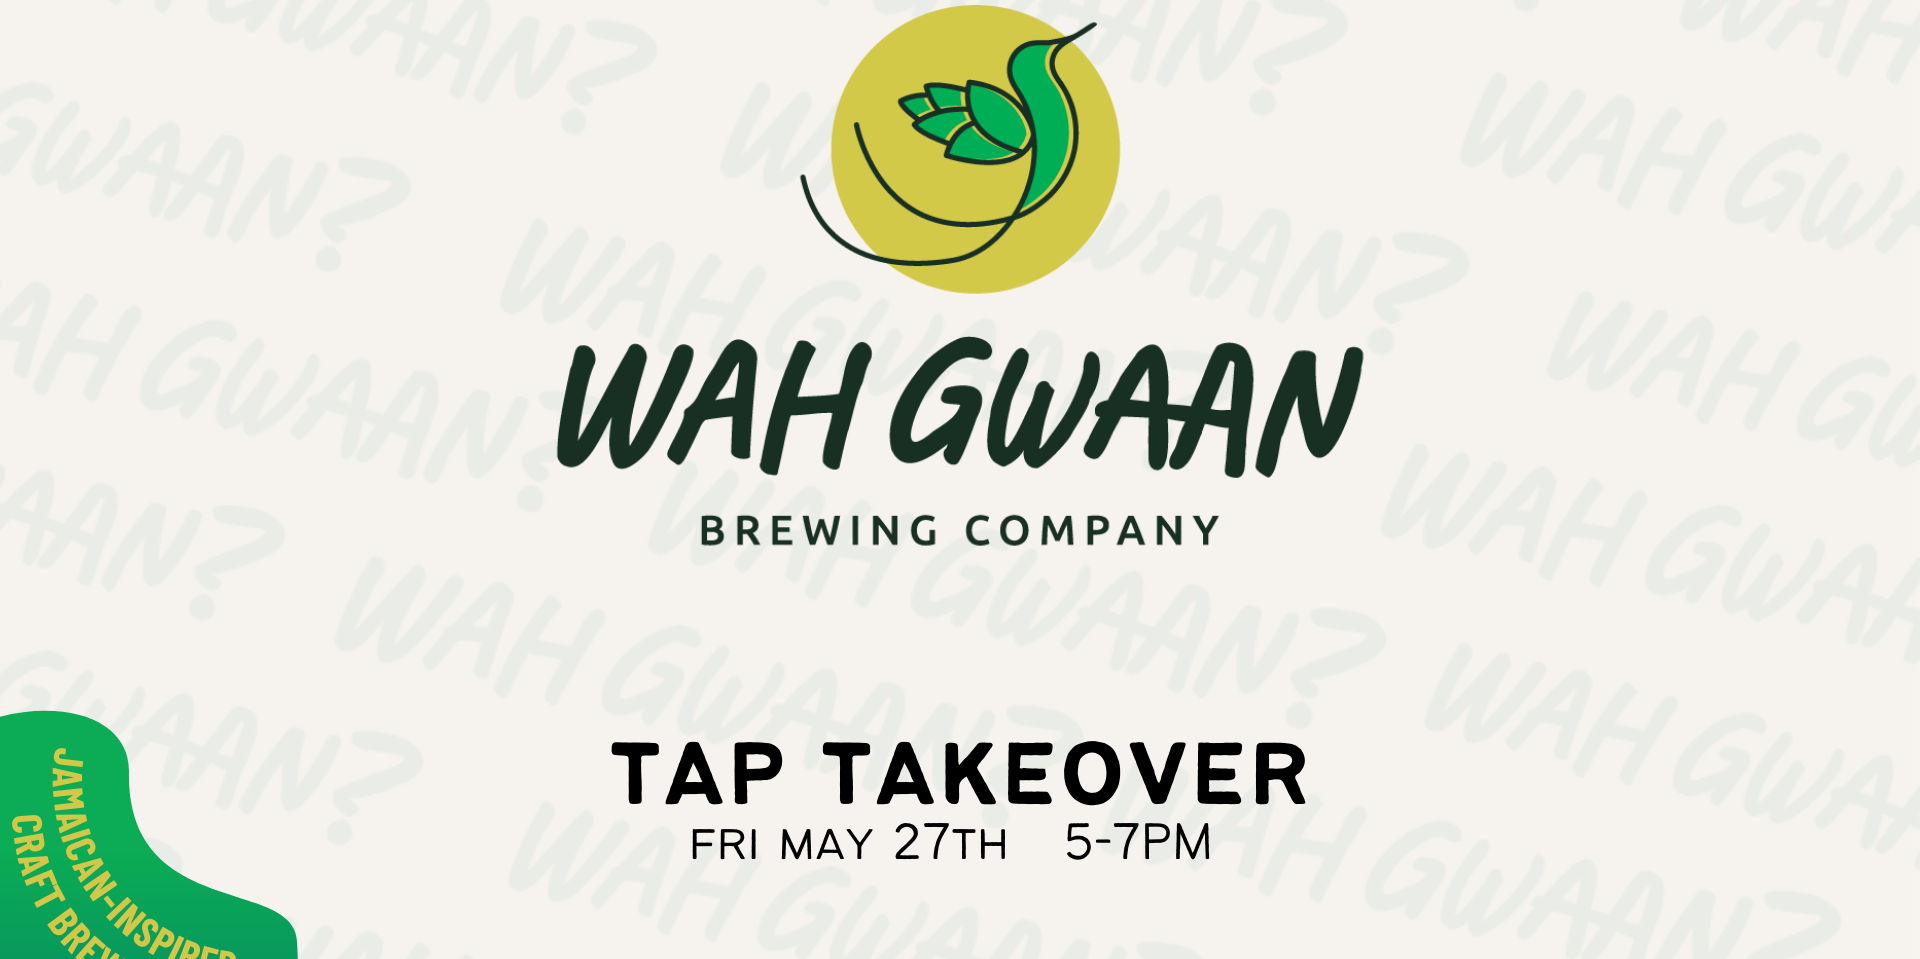 Wah Gwaan Brewing Tap Takeover promotional image